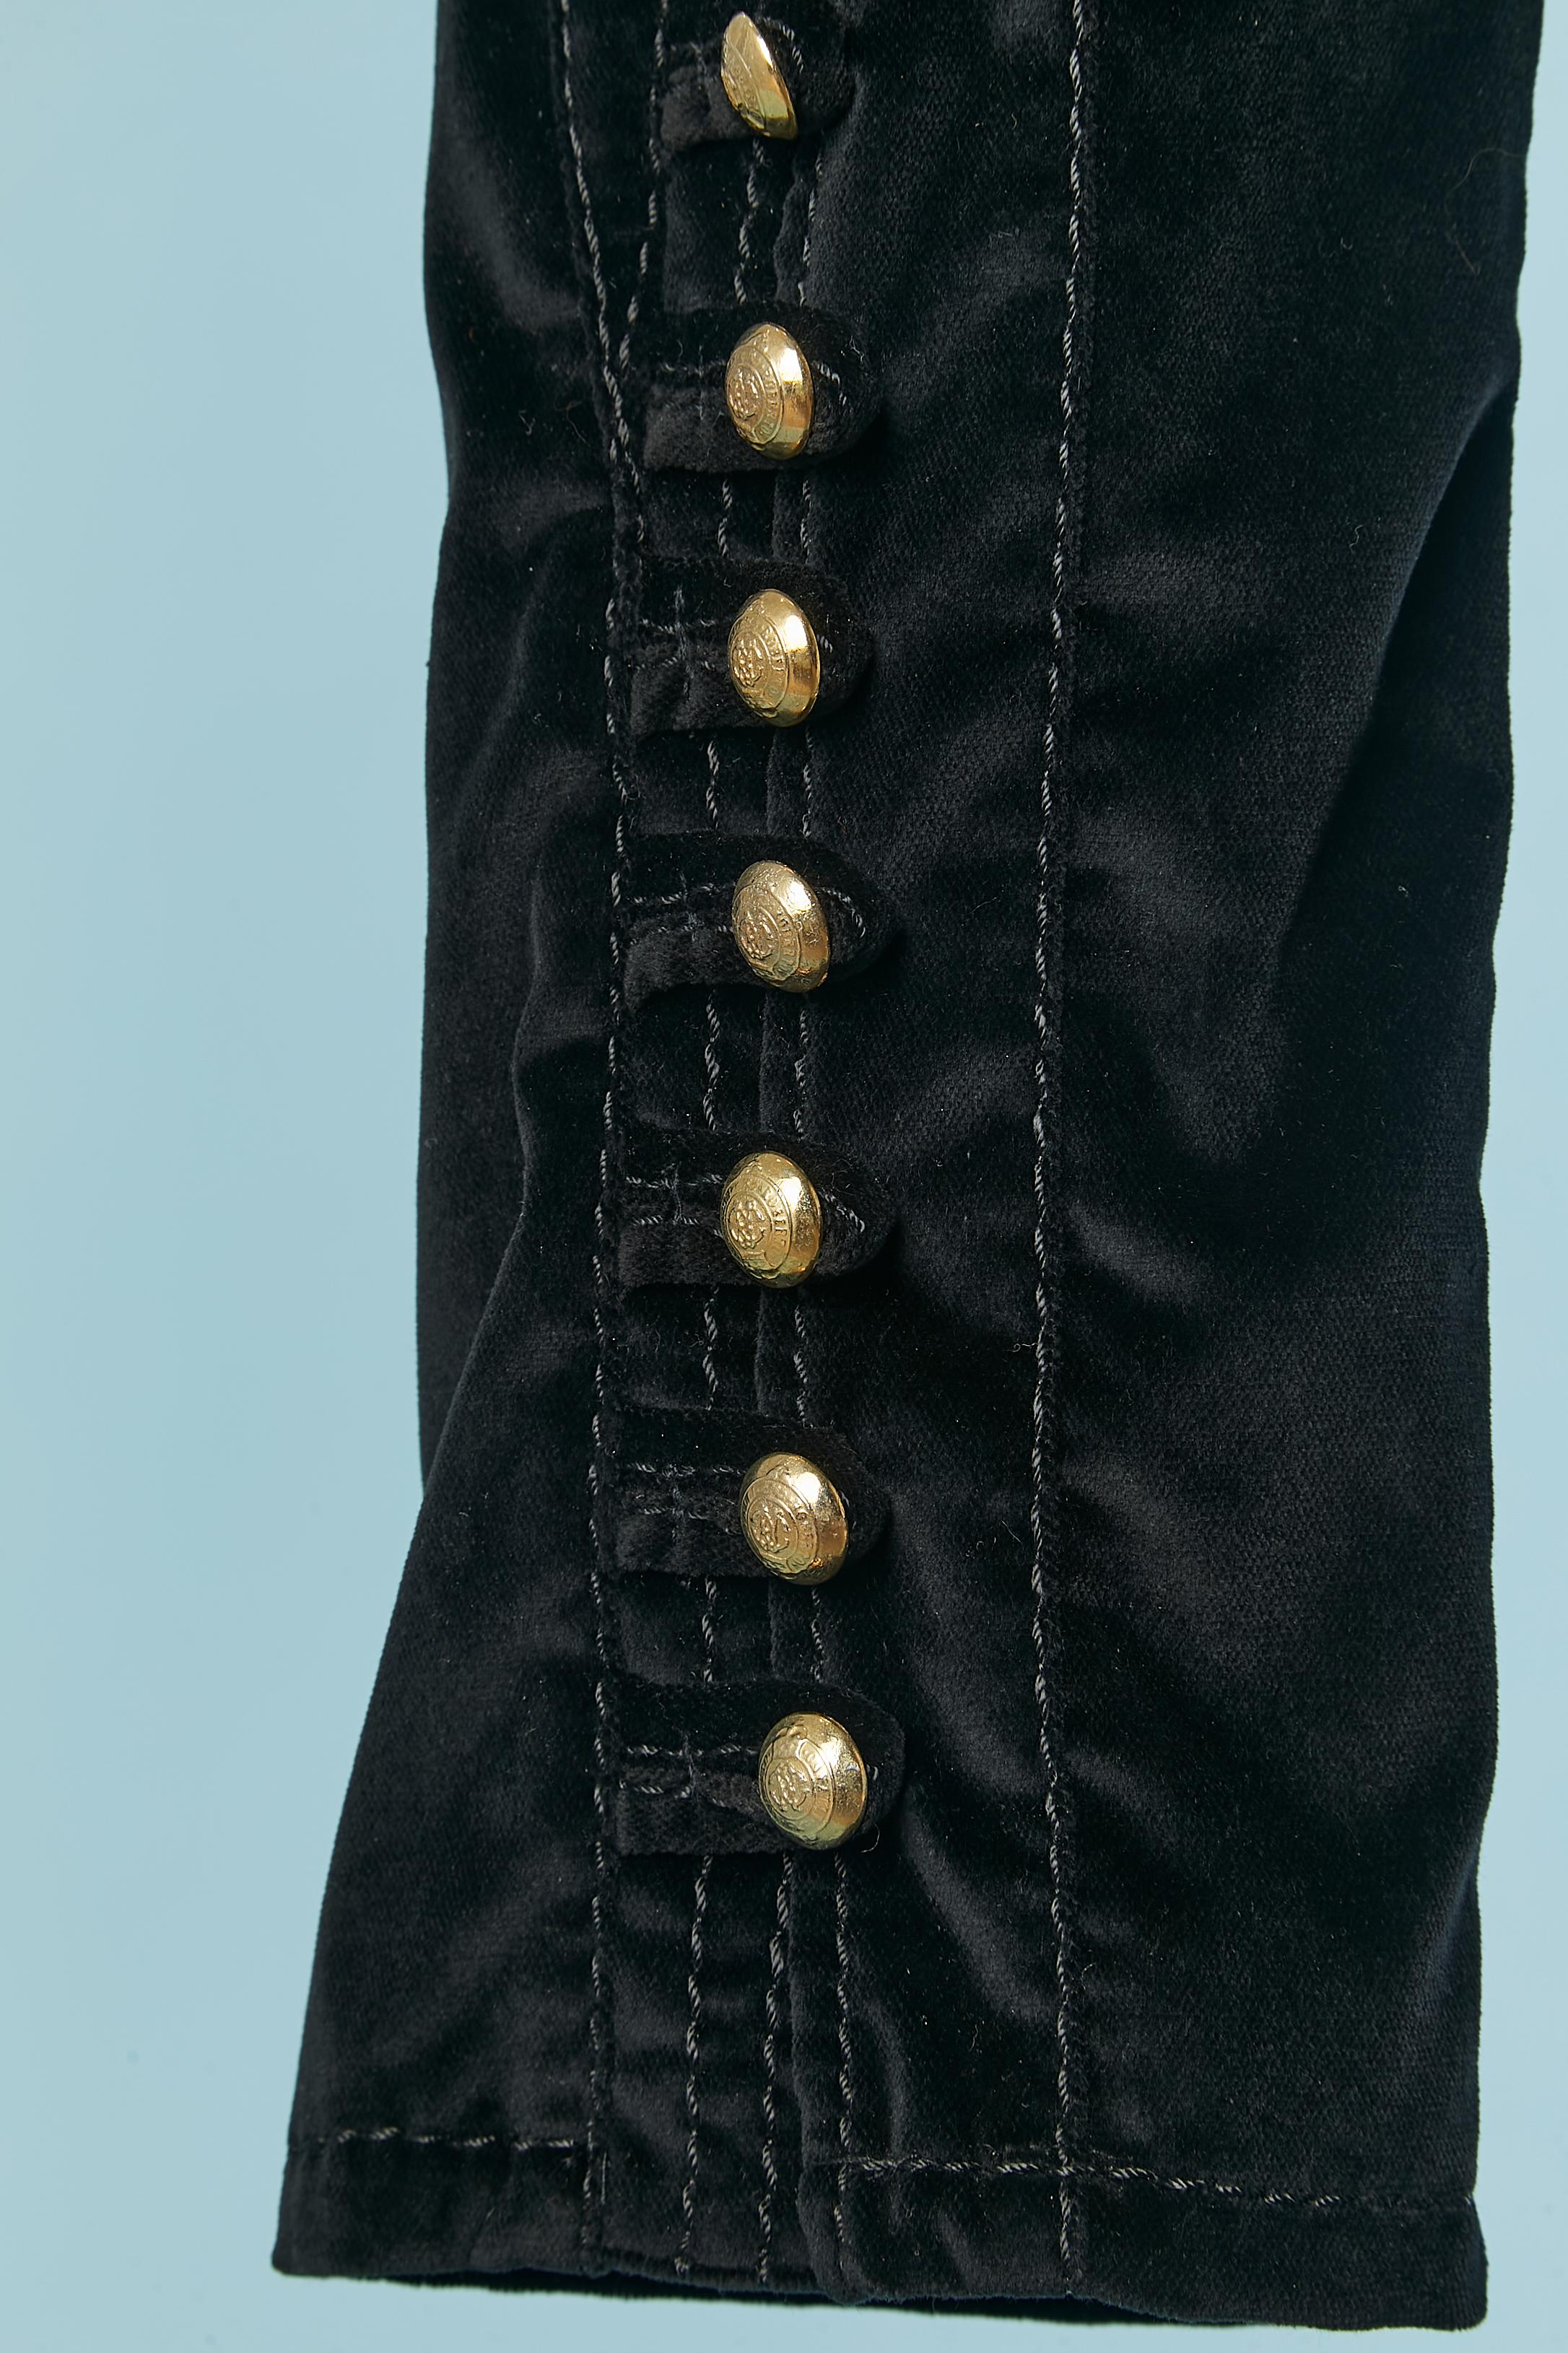 Black velvet ( 98% cotton, 2% stretch) short trousers with gold metal buttons and buttonhole on the bottom side of each legs. Cotton lining with leopard print. Cut-work. Top-stitched. Zip and hook&eye closure on the top middle front. Branded gold